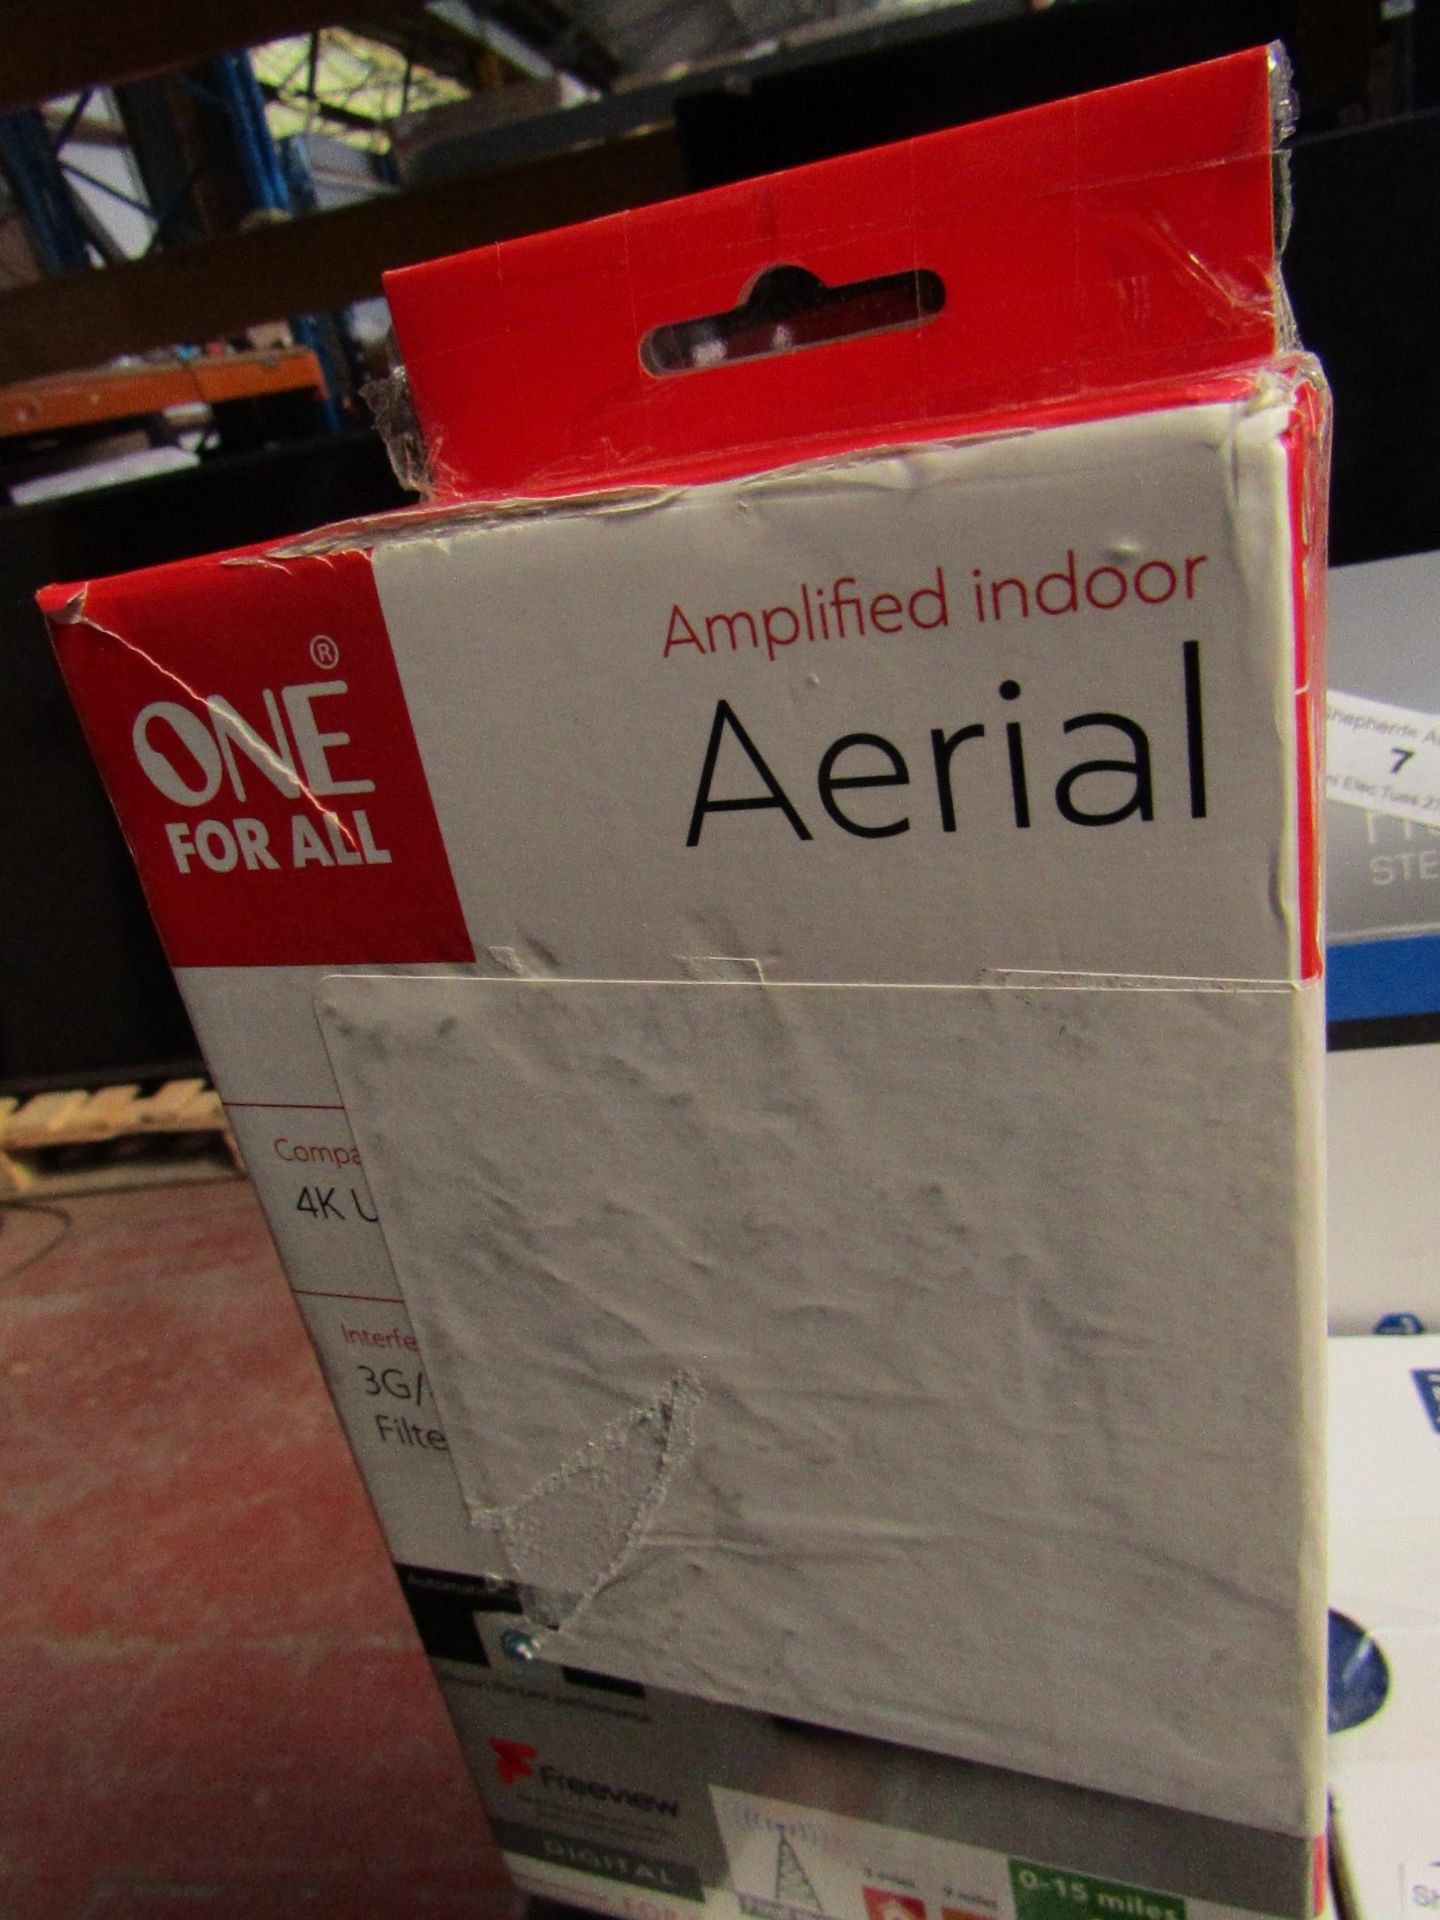 One For All Amplified Indoor Areial | Unchecked & Boxed